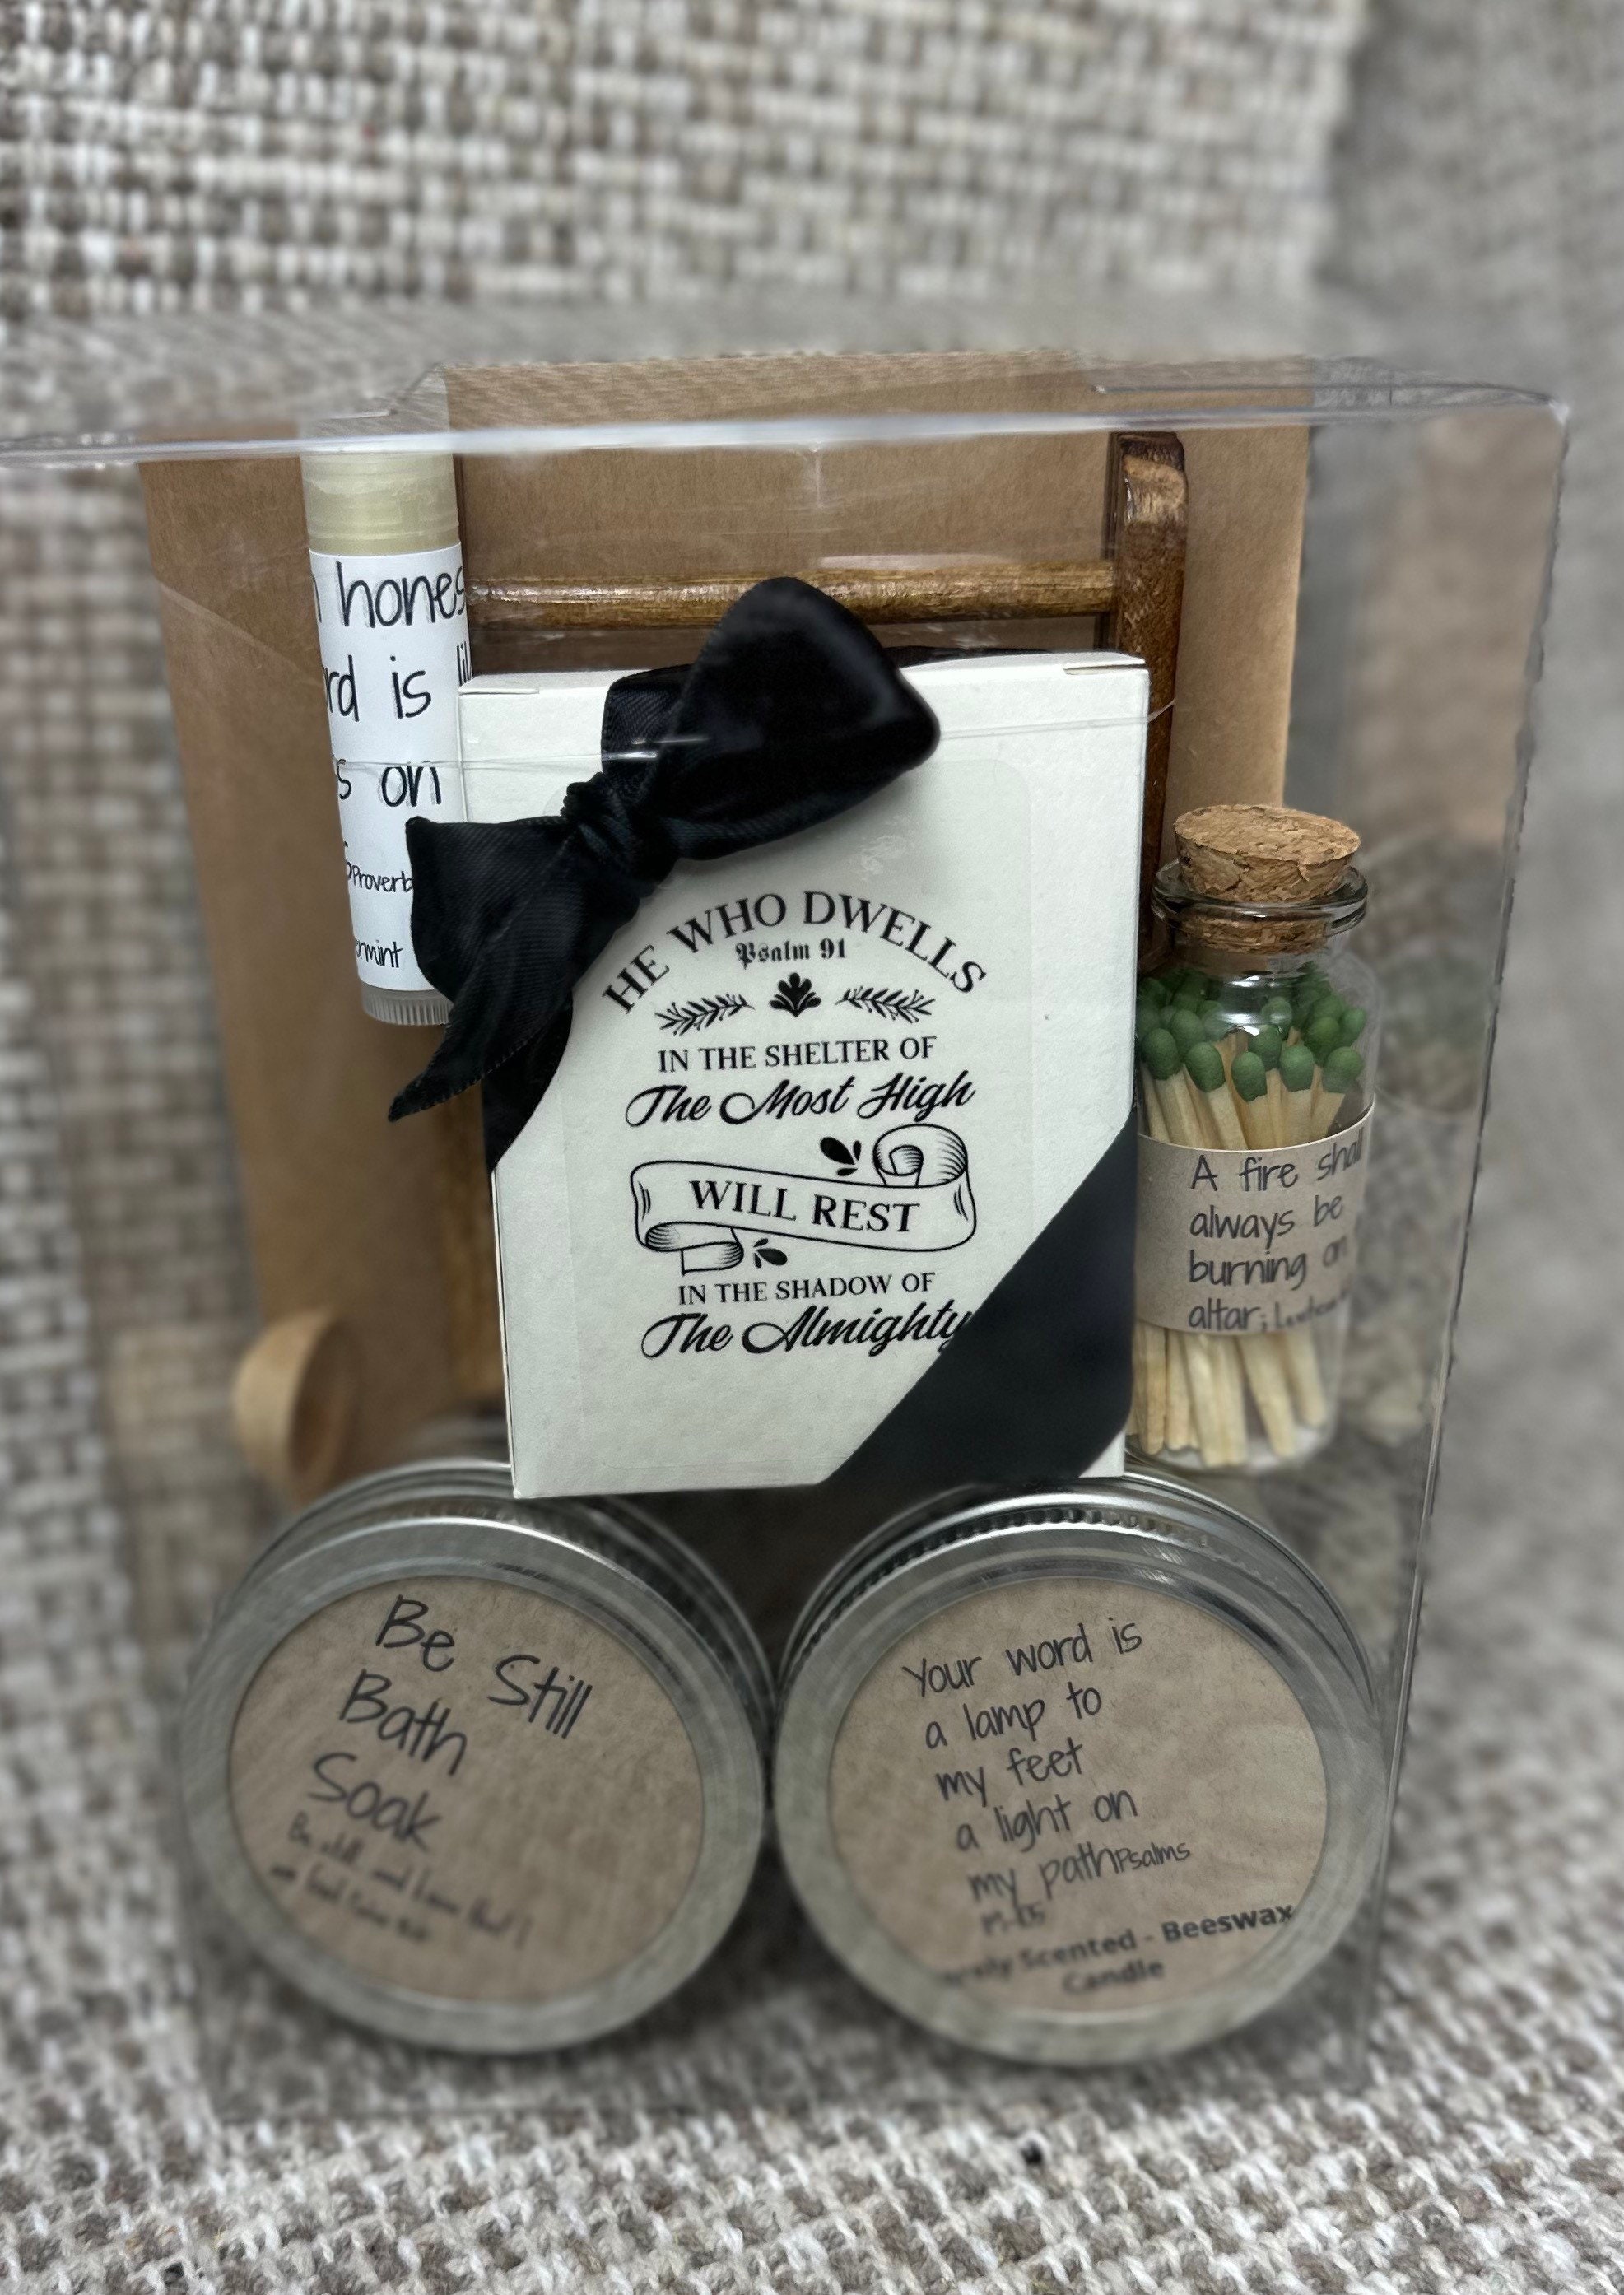 The Ultimate Butter Candle Kit, Create Delicious Butter Candles,  Charcuterie Board Ideas, Dinner Party, Gift for New Home, Holiday Party 